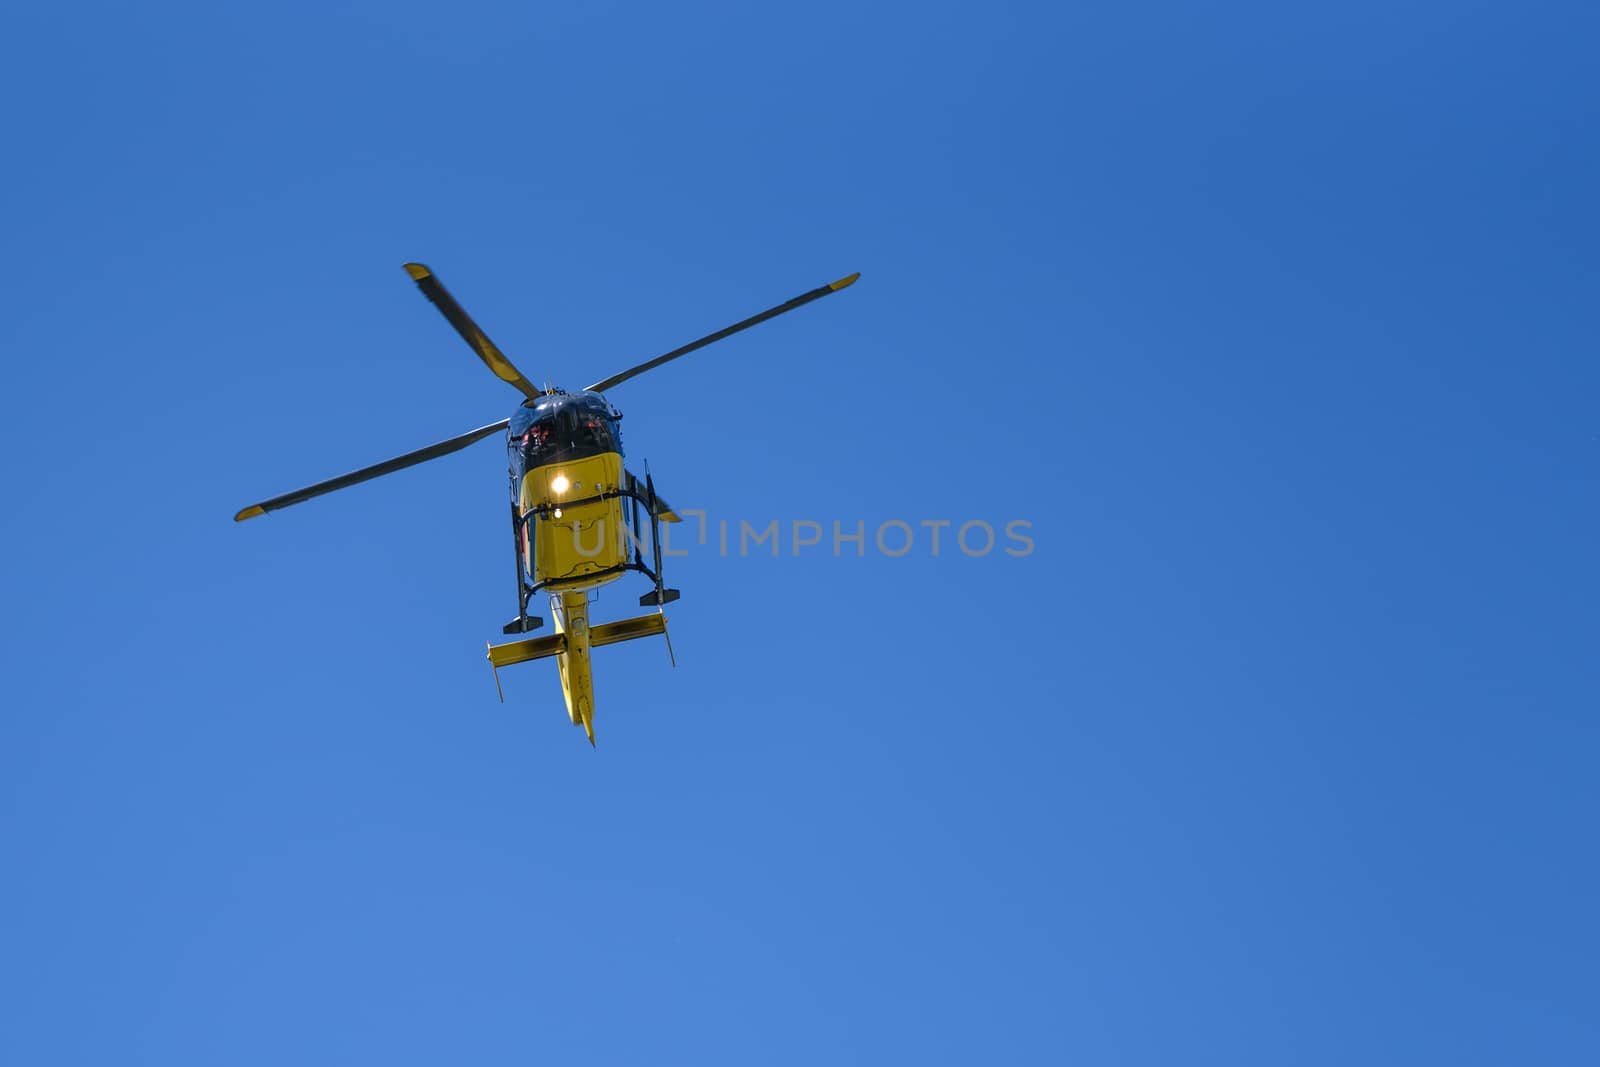 Generic yellow helicopter used for firefighting and rescue operations on the blue sky background - low angel view.